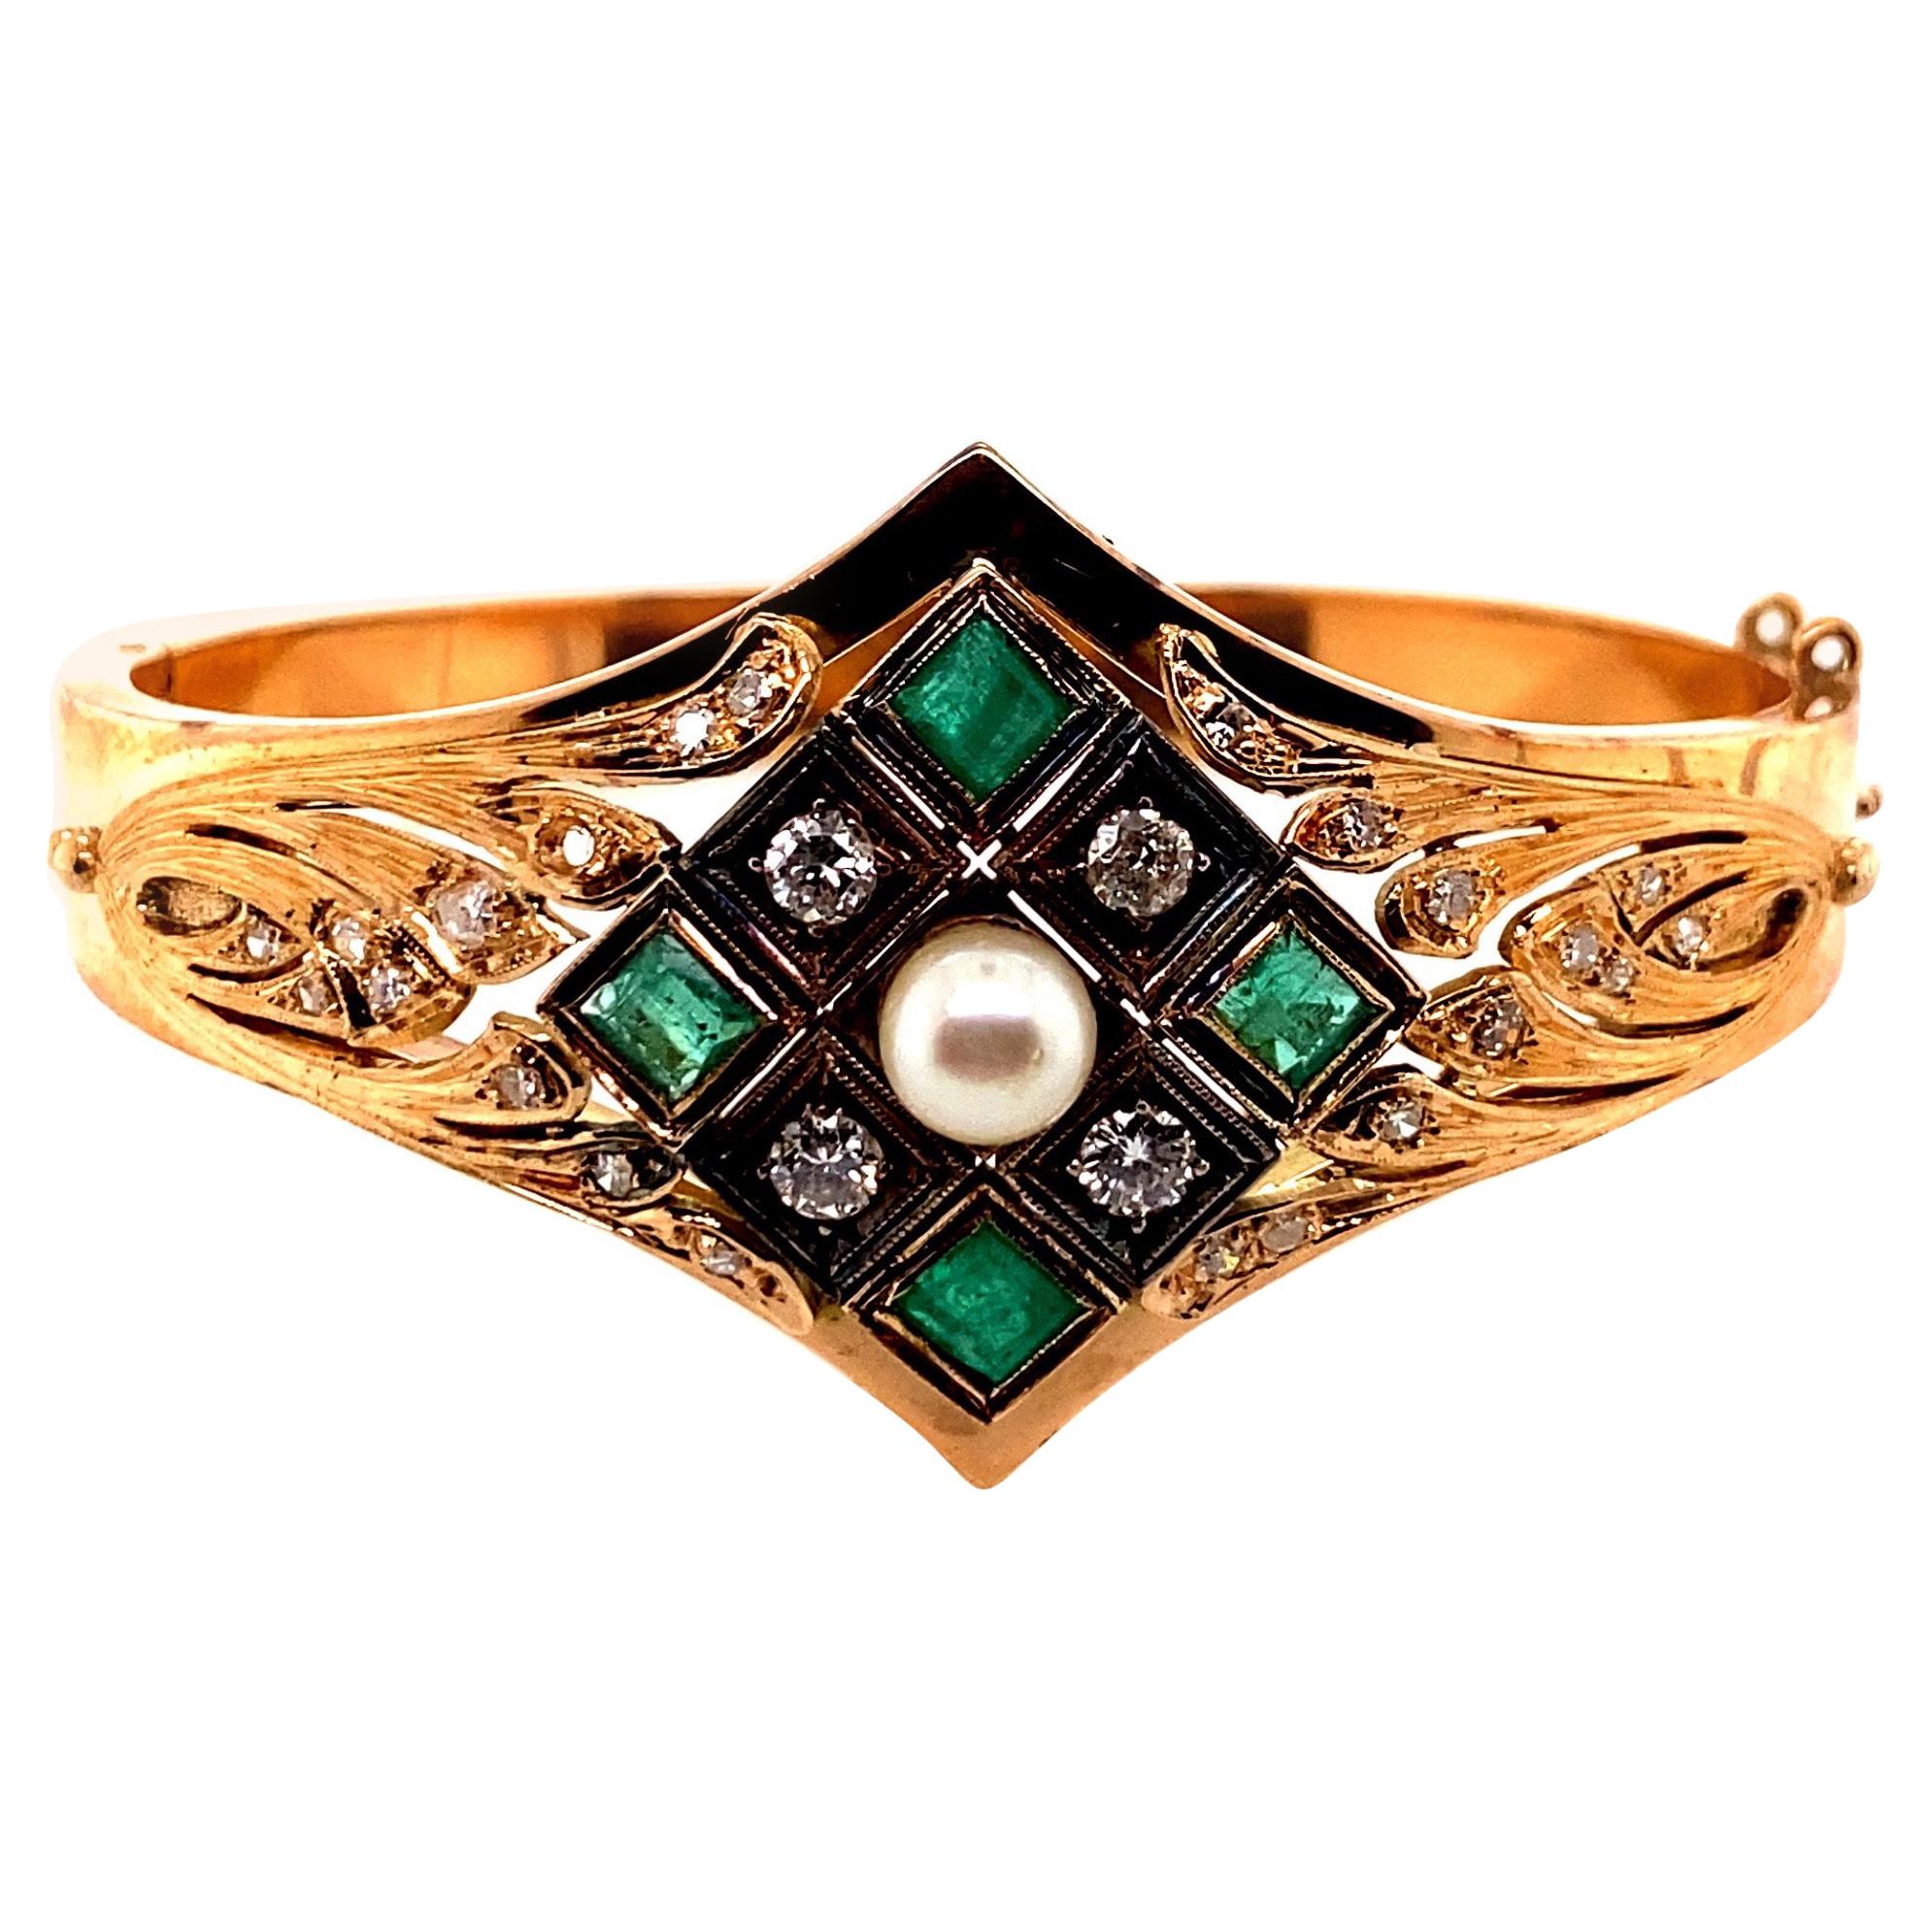 Vintage 14K Rose Gold Bangle Bracelet with Emeralds and Diamonds and Pearl